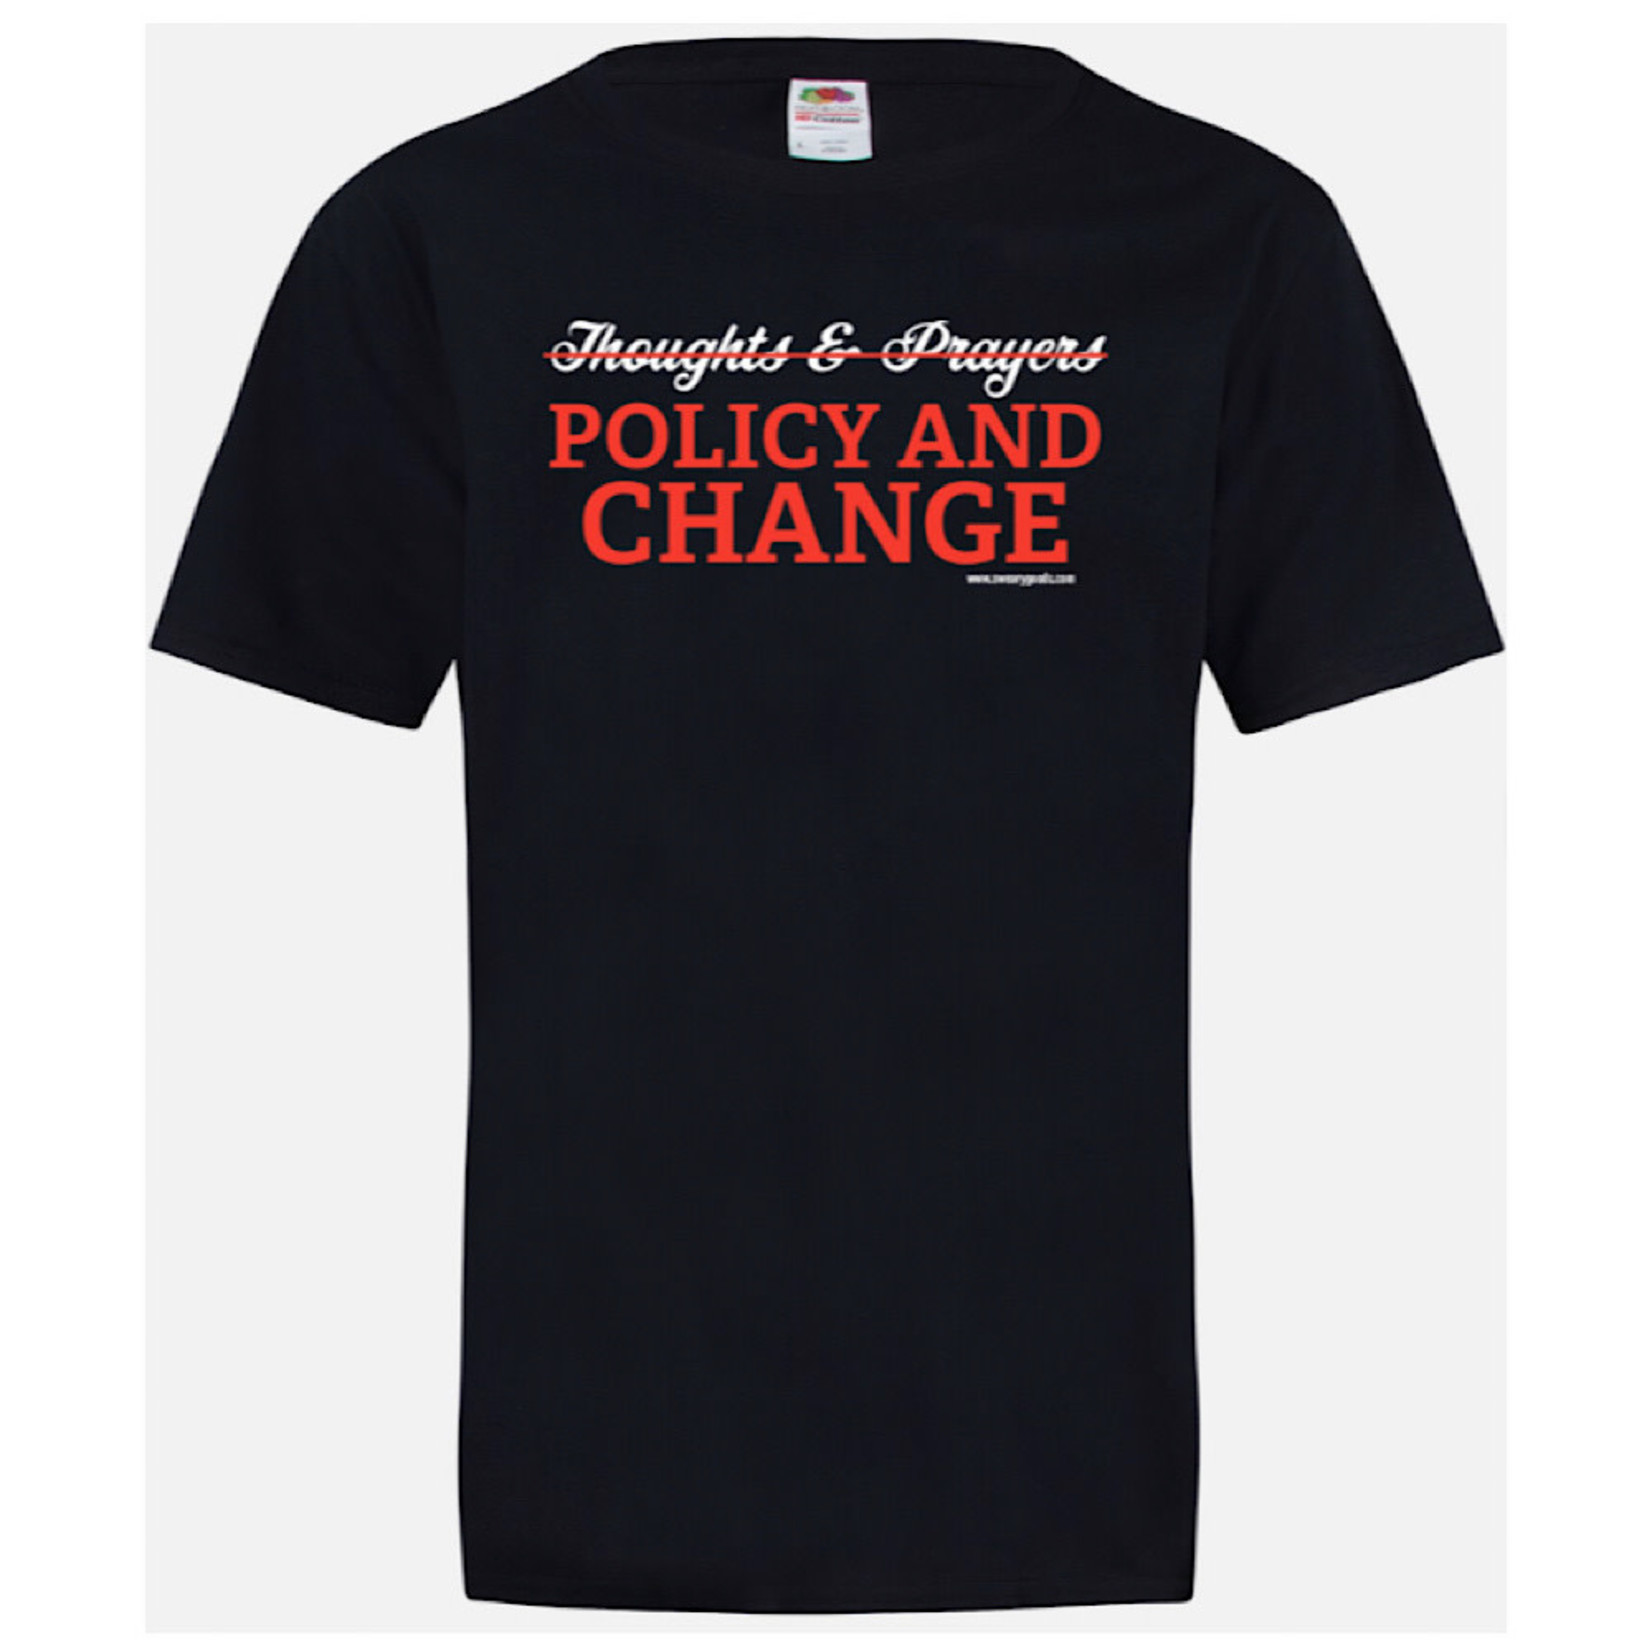 Bad Annie’s T-Shirt - Policy And Change